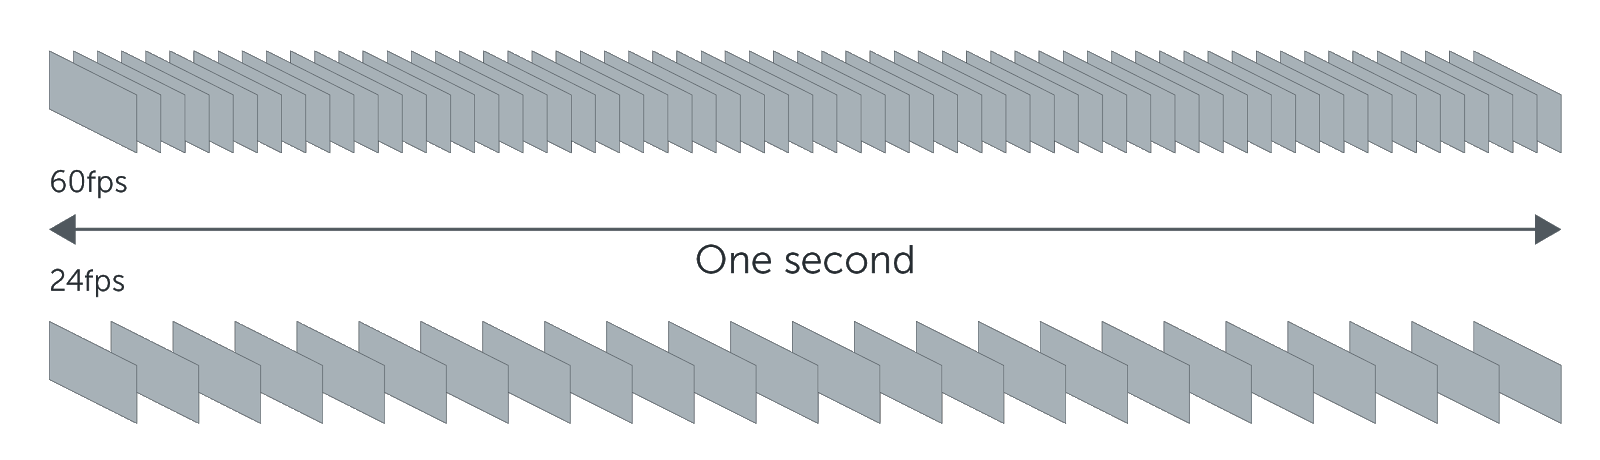 Visual comparision of a 60 frame rate per second versus a 24 frame rate per second.